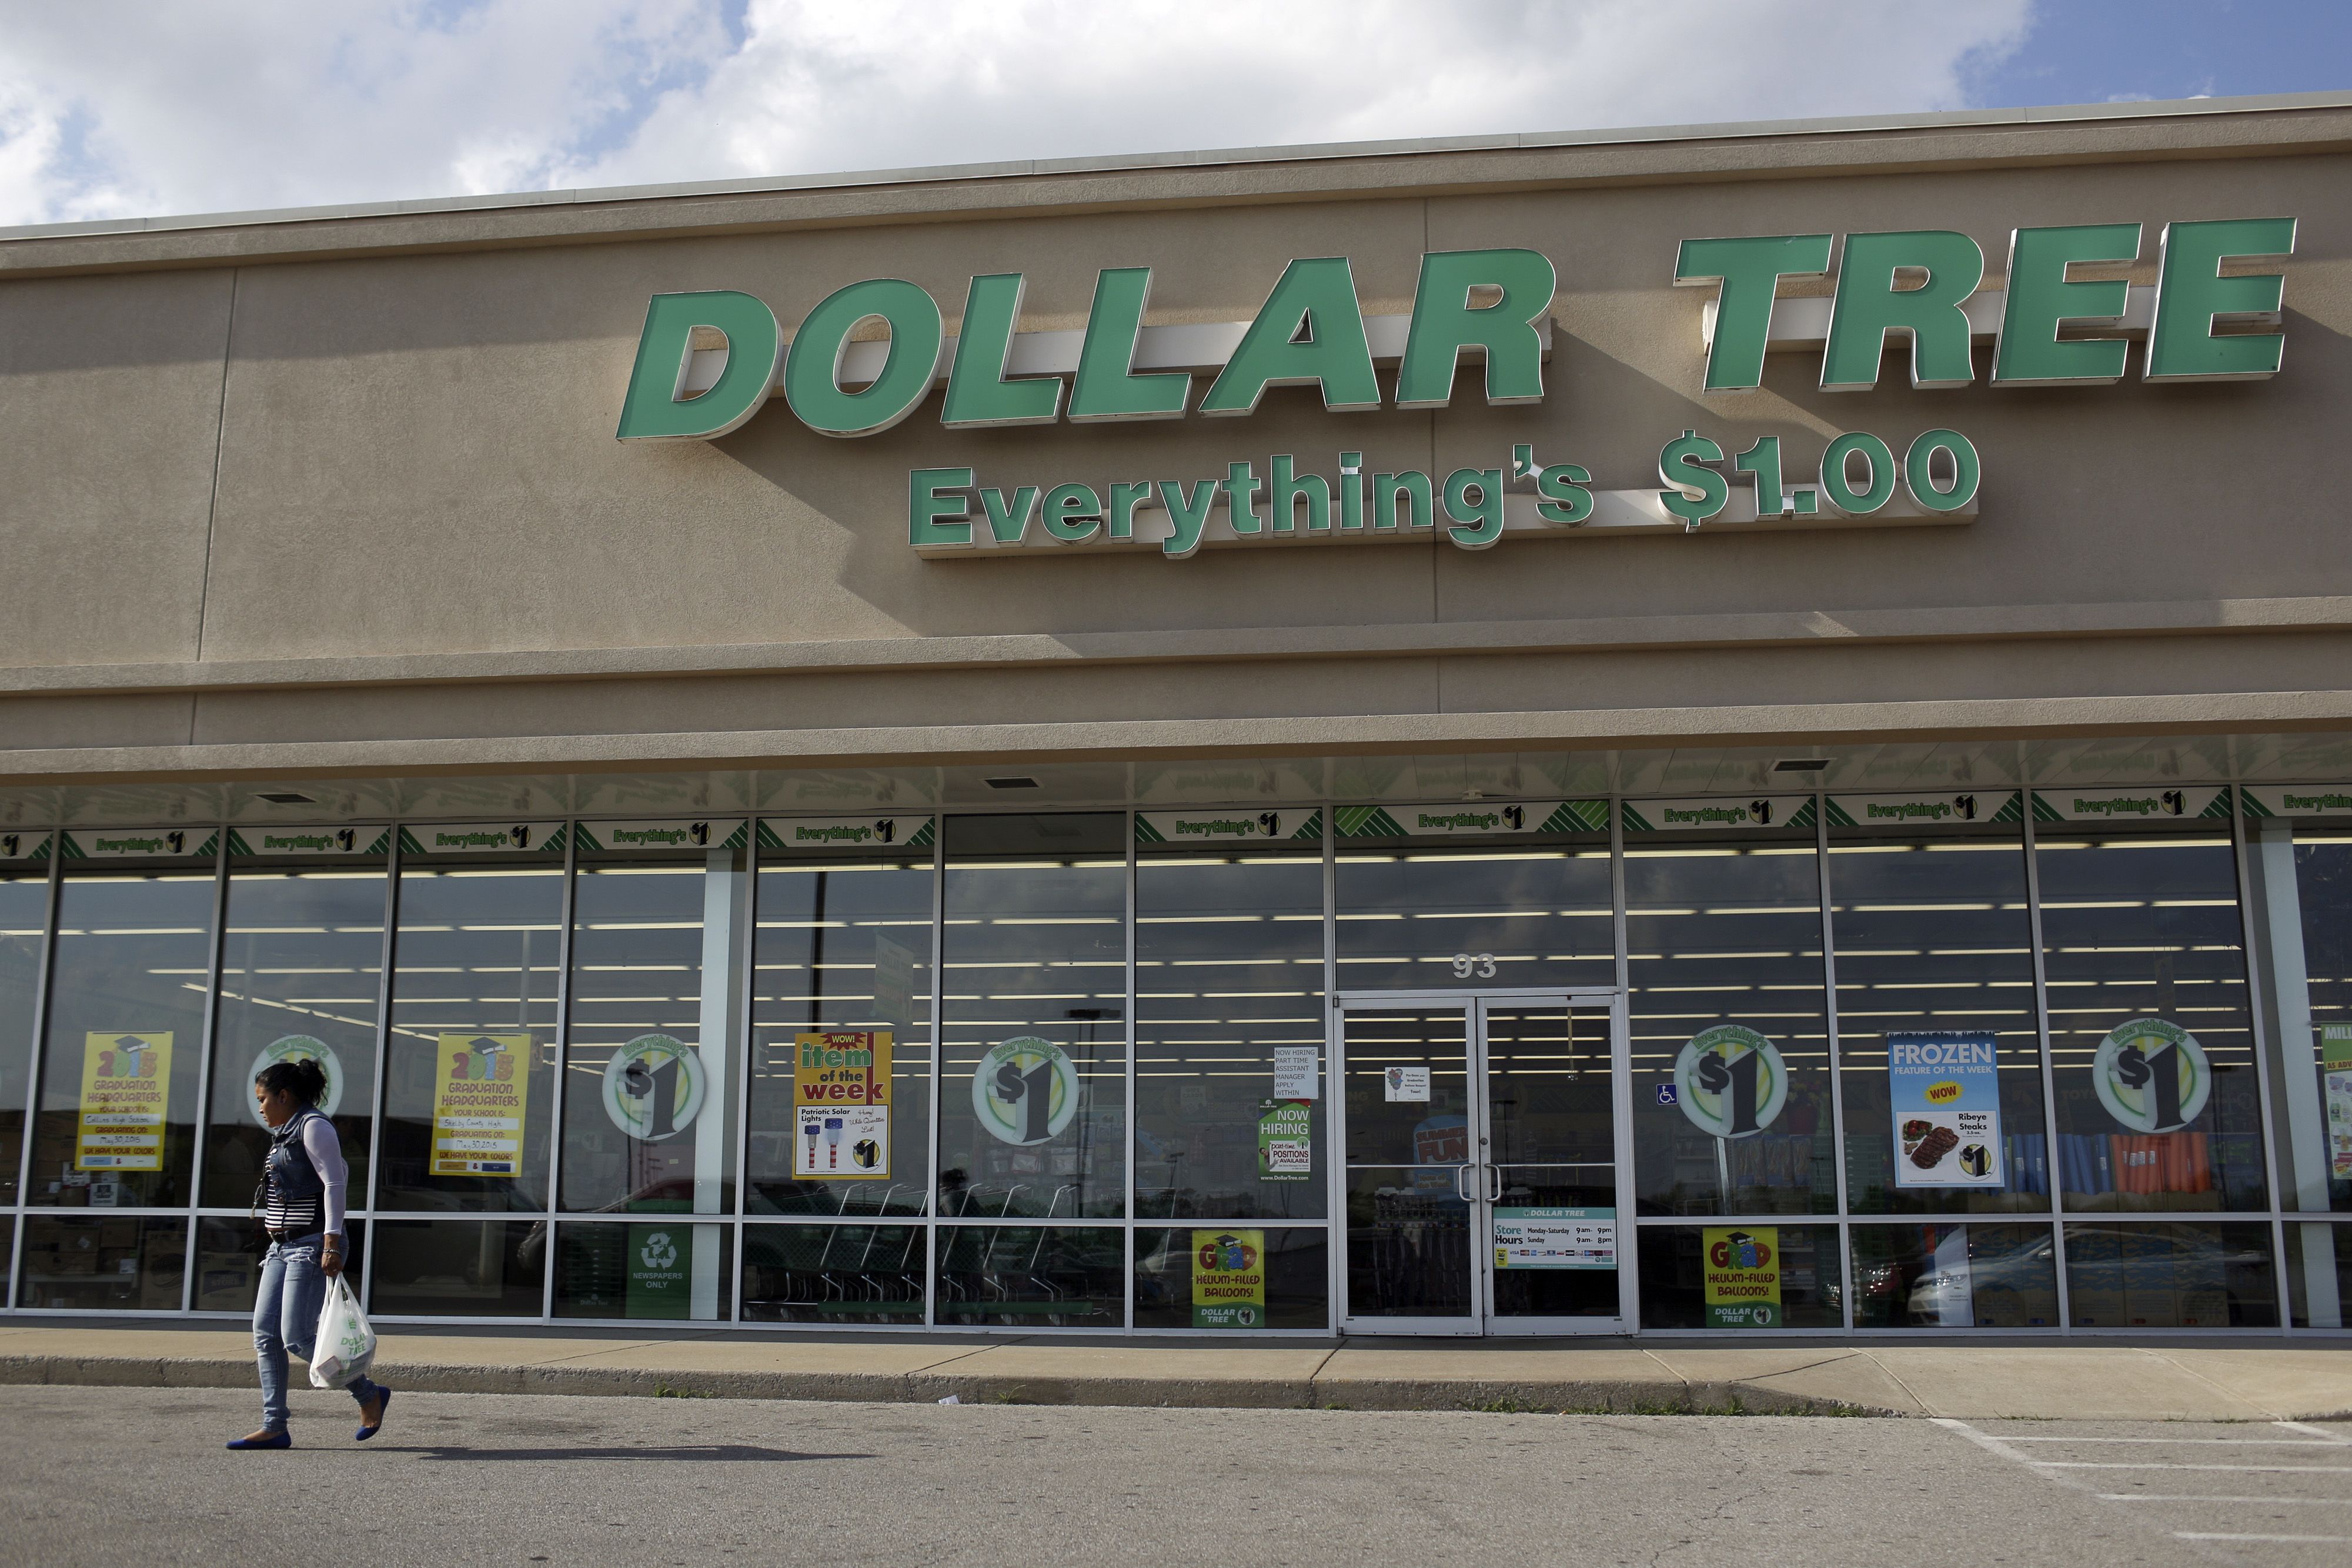 Dollar stores are thriving – but are they ripping off poor people